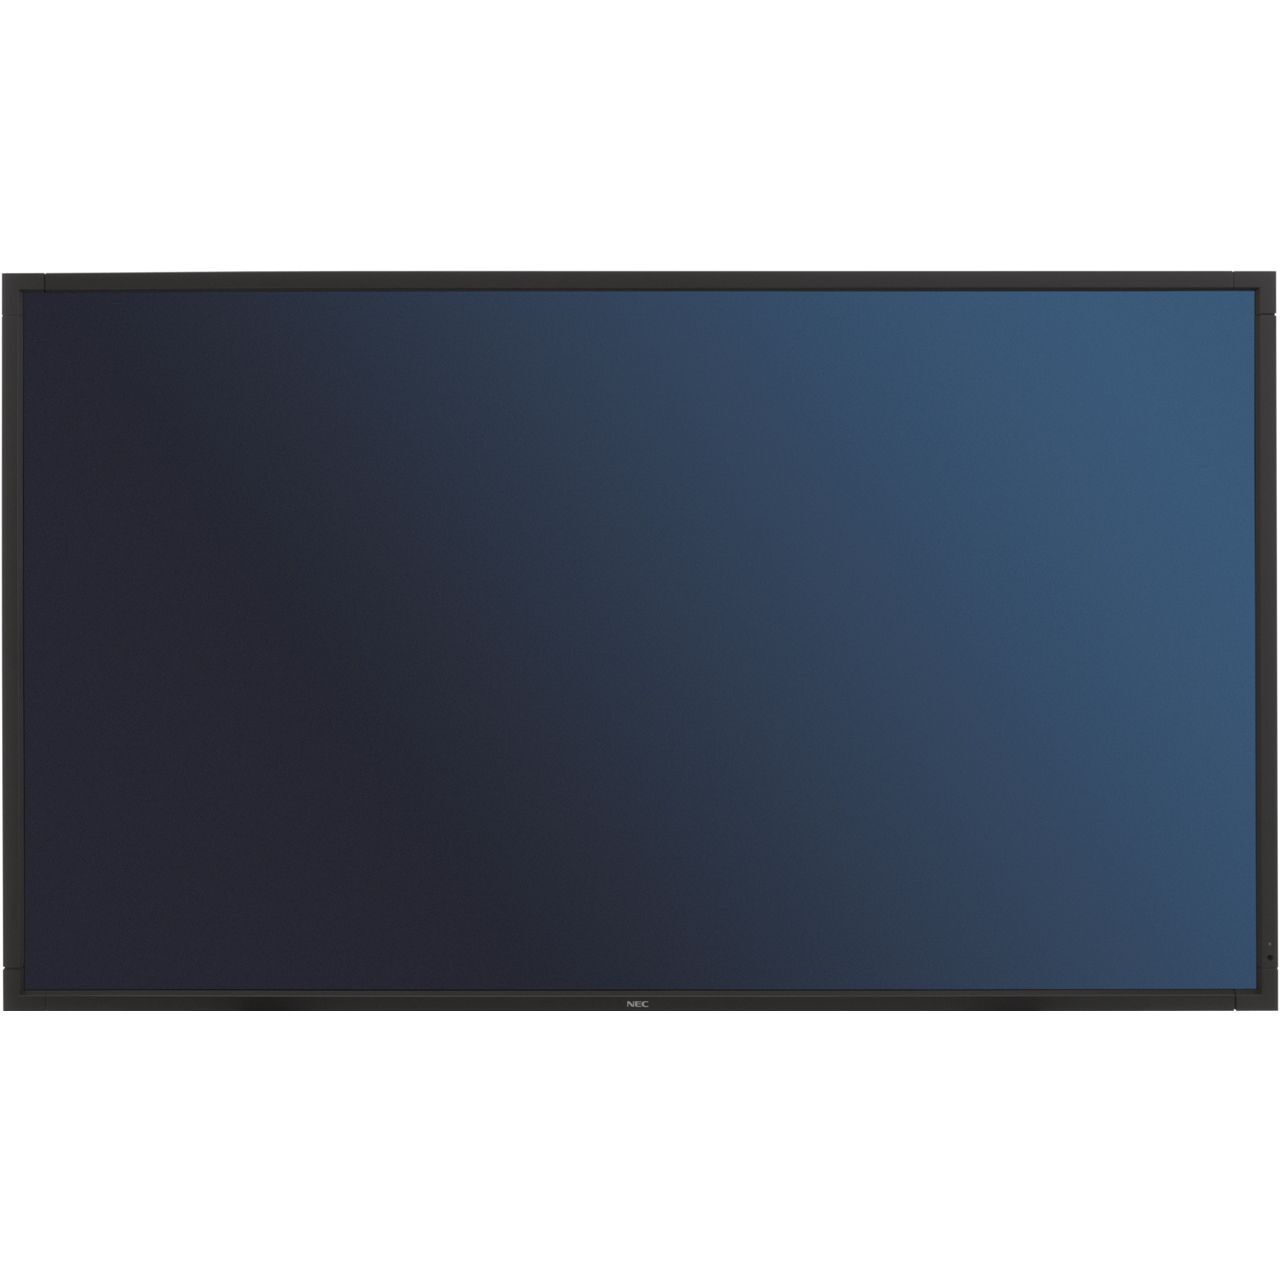 NEC 55" P551 with touchscreen NEW IN BOX for Digital signage or conference room